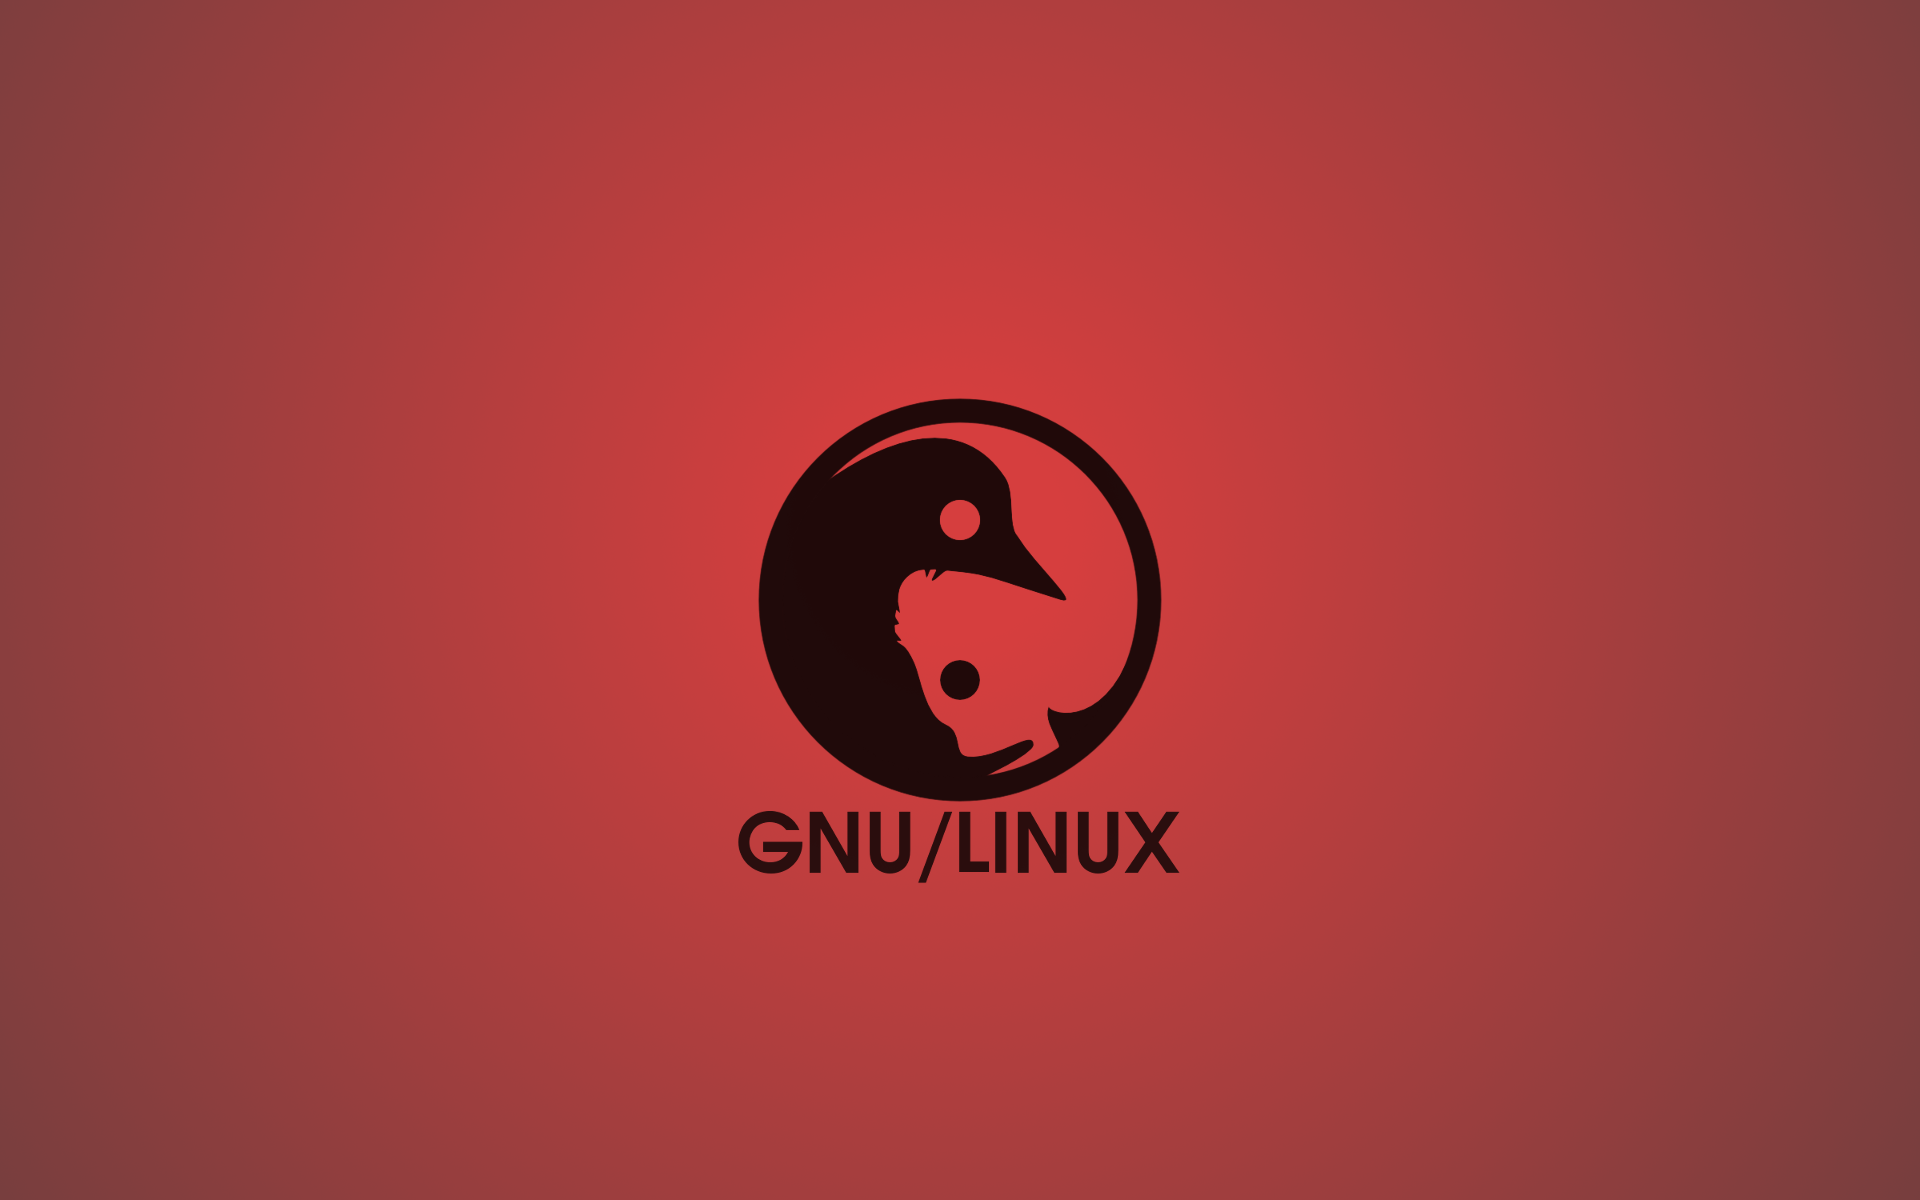 linux, Gnu, Red, Systems, Computer Wallpaper HD / Desktop and Mobile Background